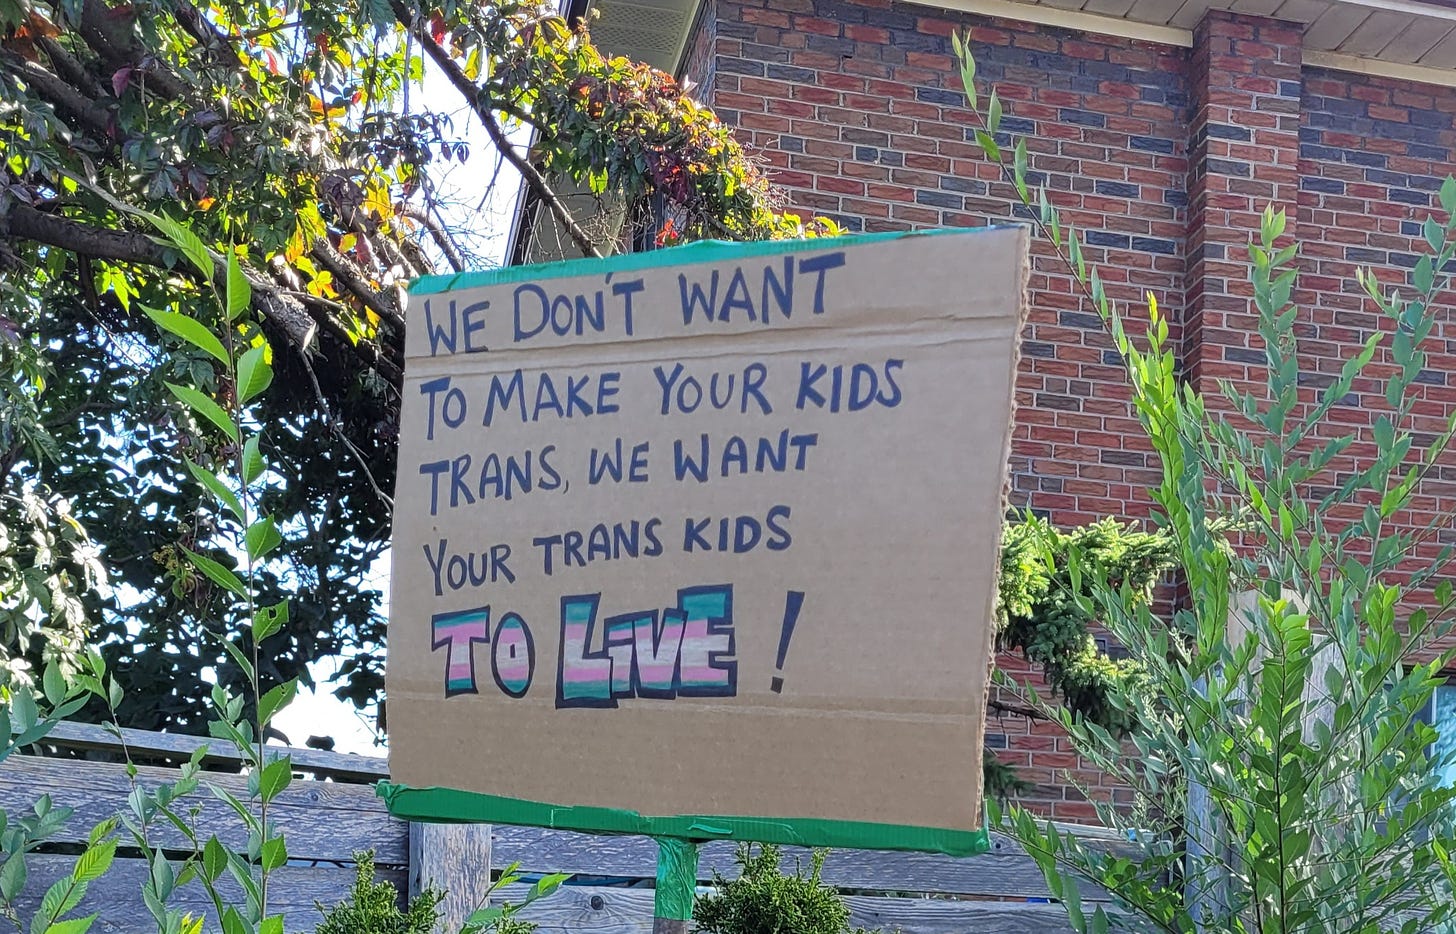 A sign reads "We don't want to make your kids trans, we want your trans kids to live!"